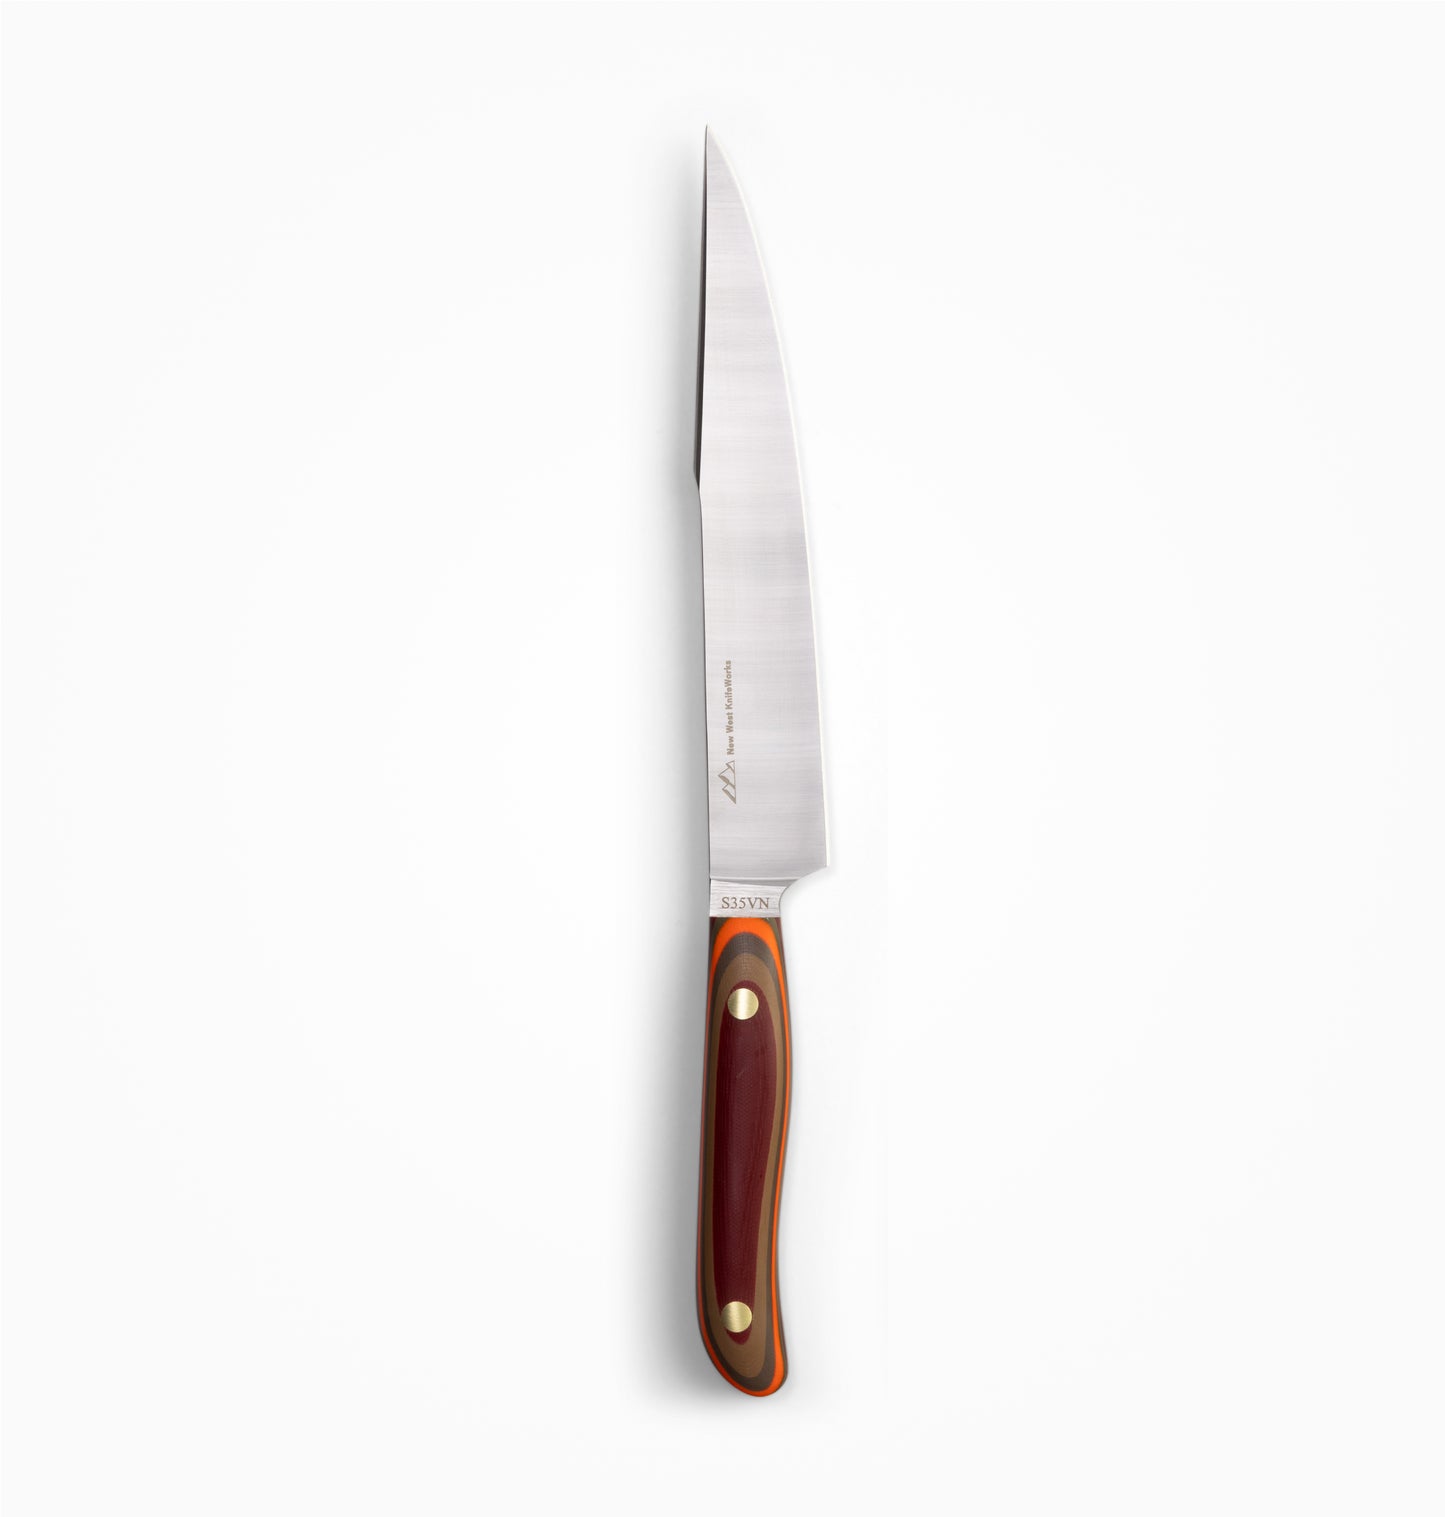 9" Carving Knife